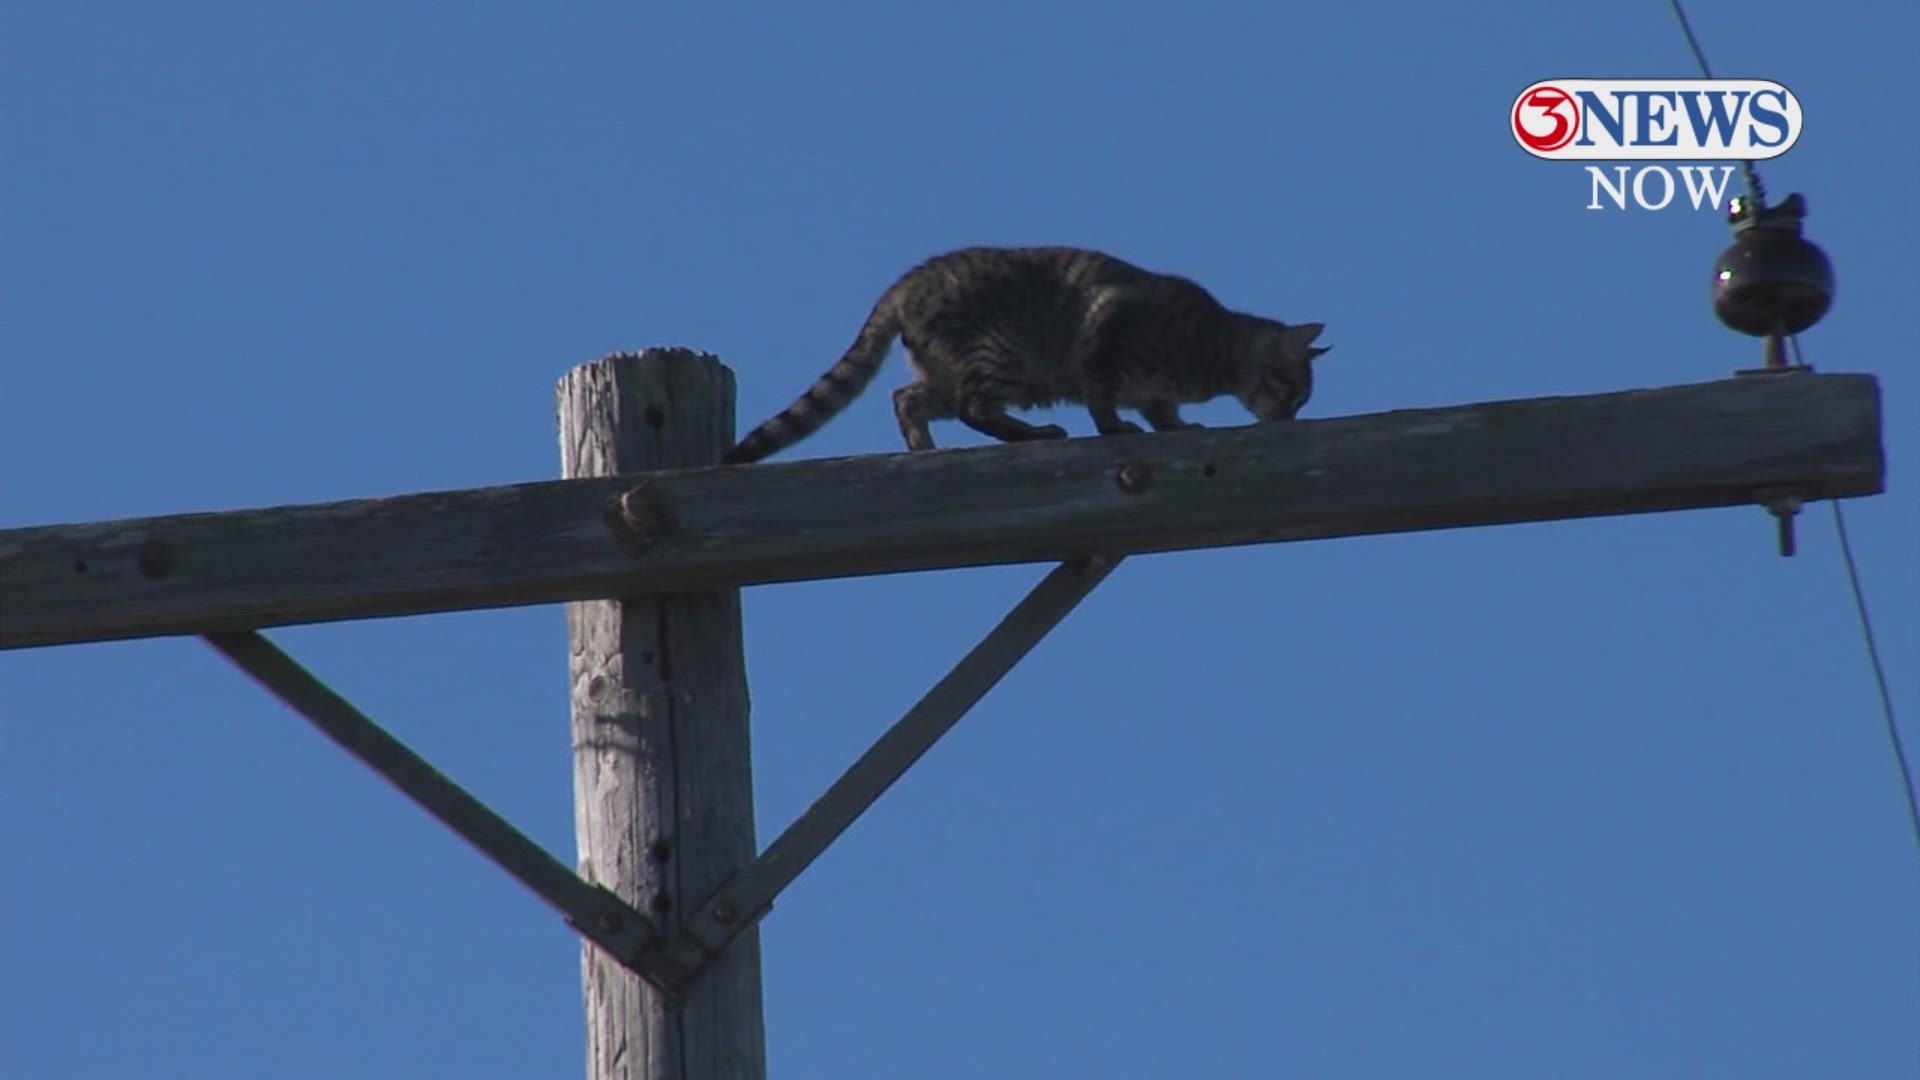 A cat stuck on top of a power pole overnight was rescued Wednesday morning thanks to a concerned Corpus Christi resident, a local radio station and a business owner.